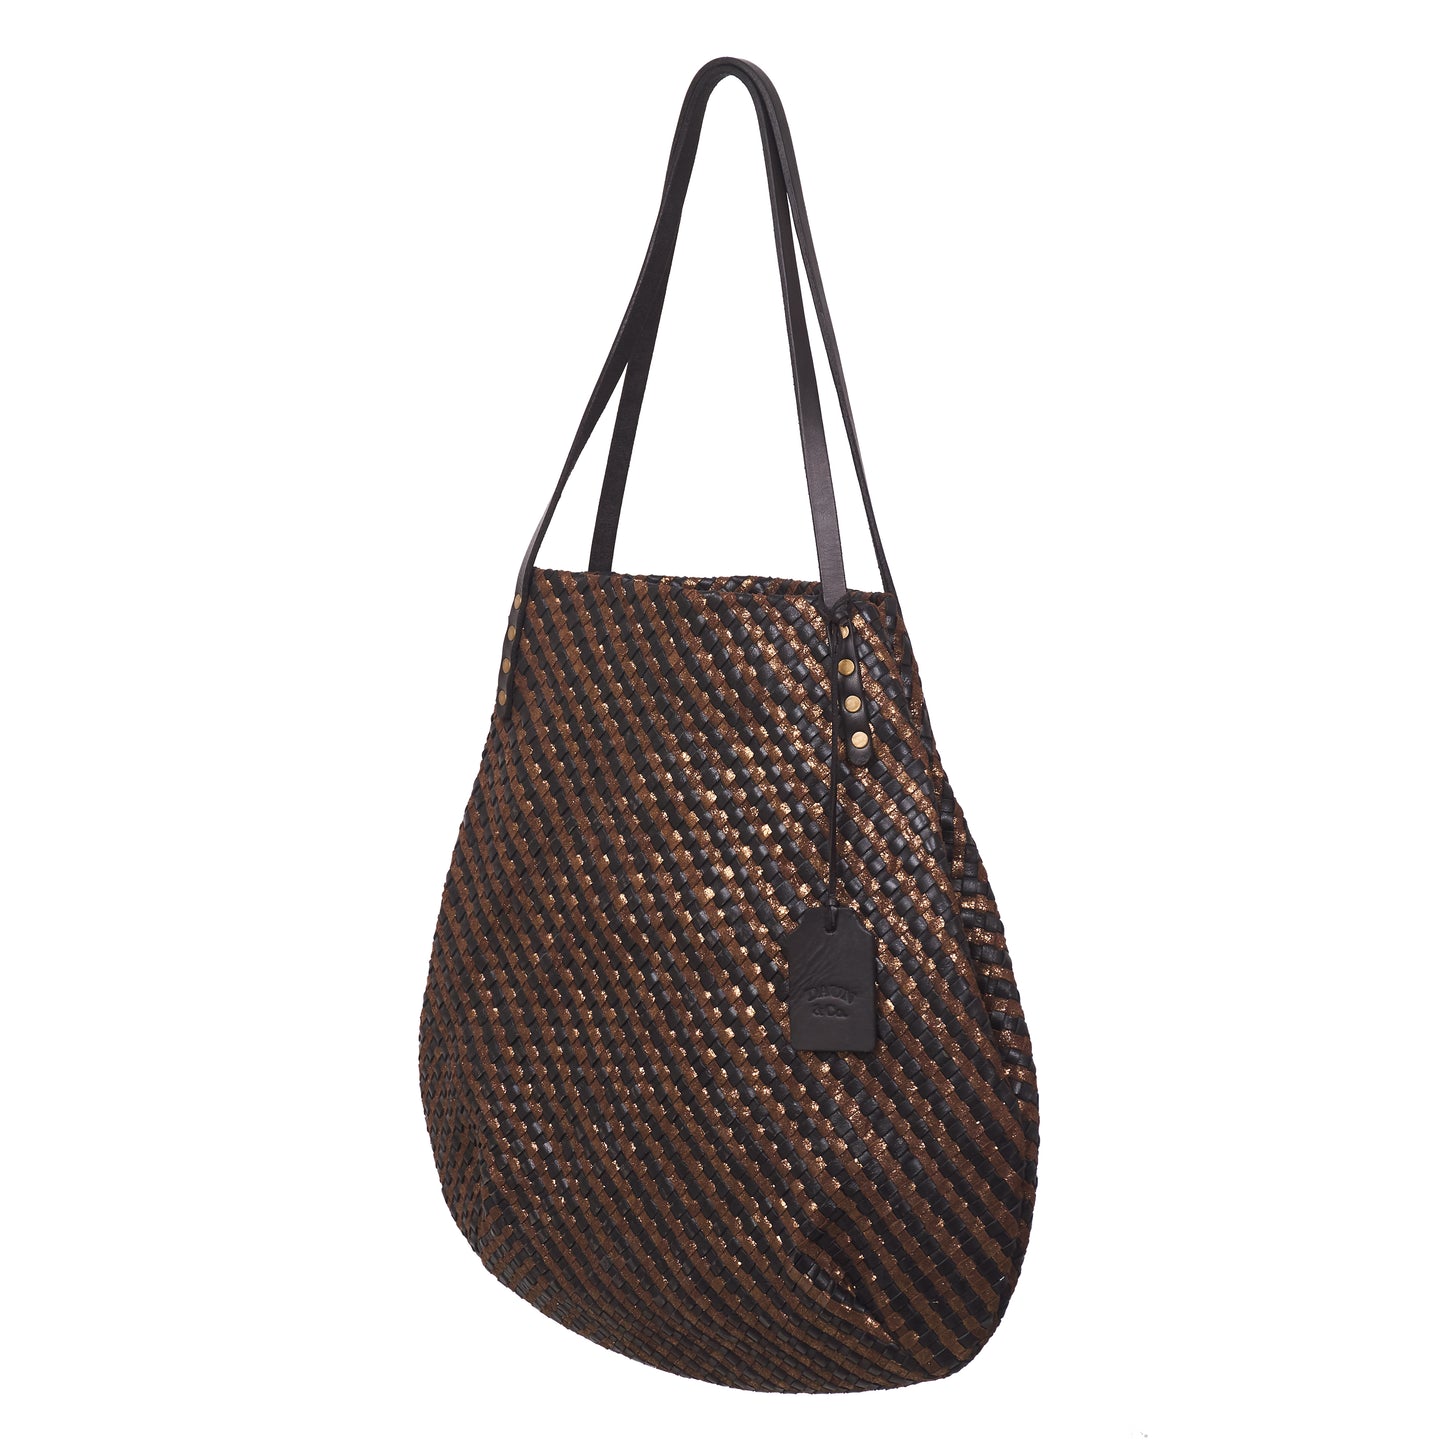 SIMPLY FIVE TOTE - Woven Leather | Black Gold